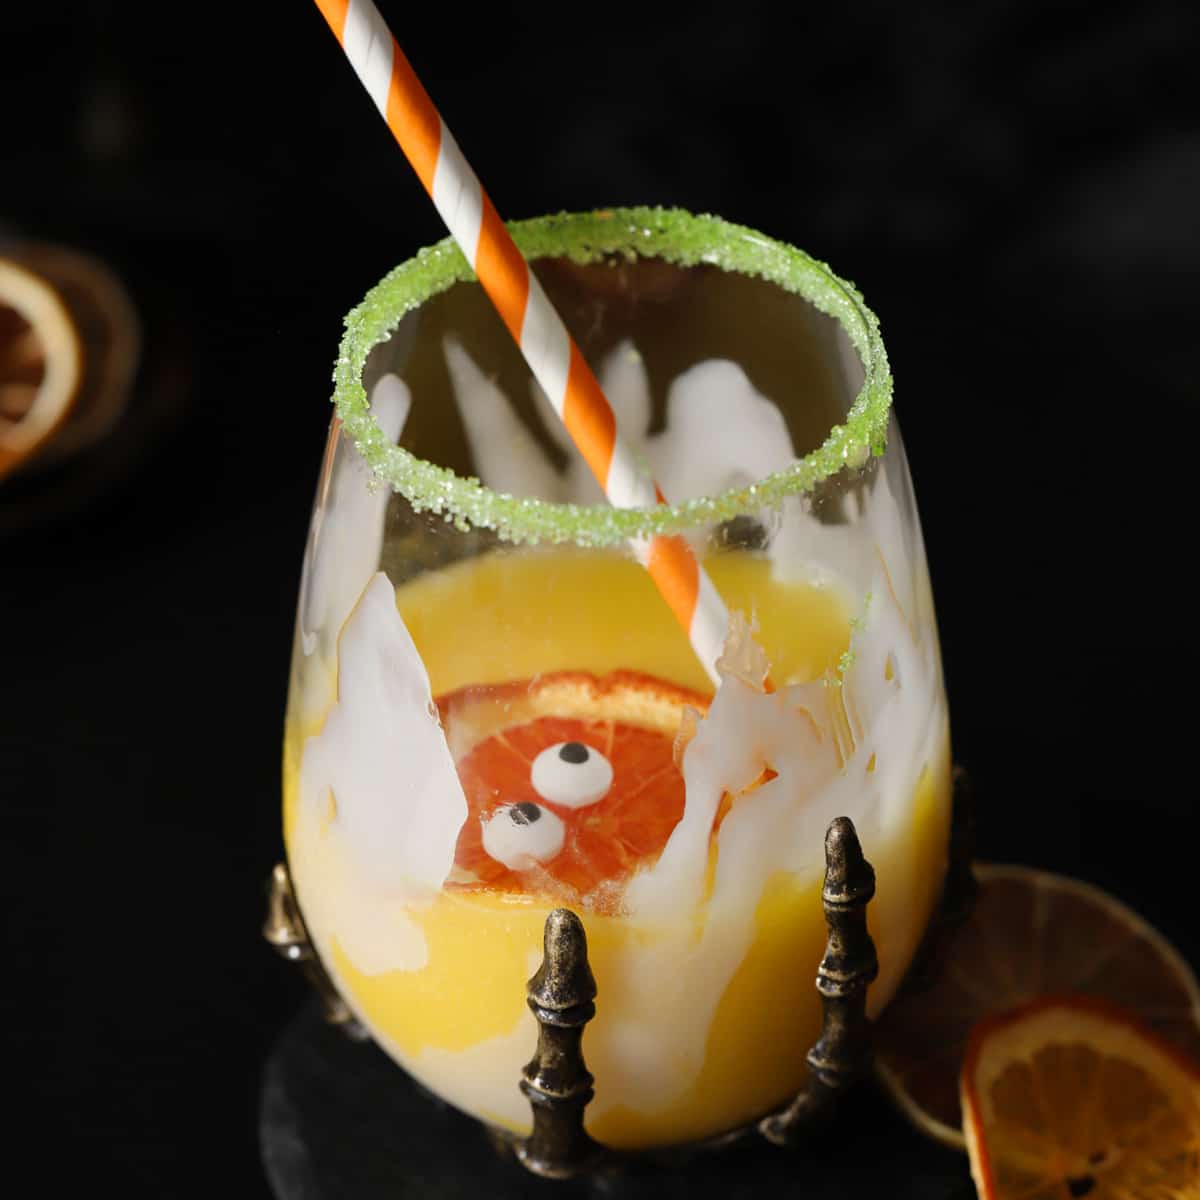 A glass of non-alcoholic Halloween drink.